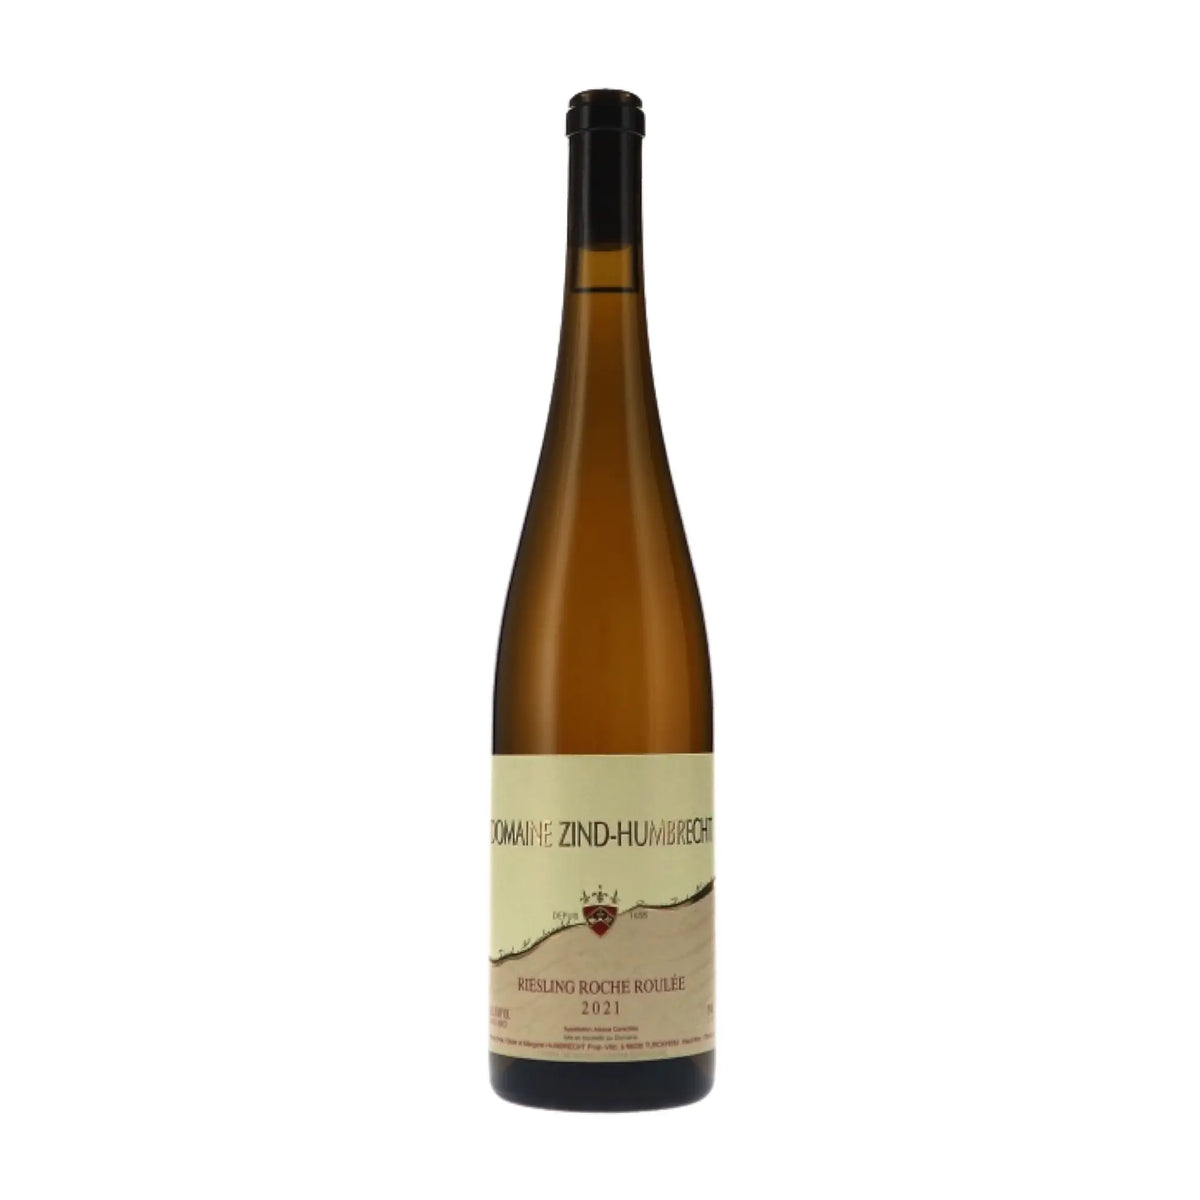 Domaine Zind-Humbrecht-Weißwein-Riesling-2021 Riesling Roche Roulée-WINECOM